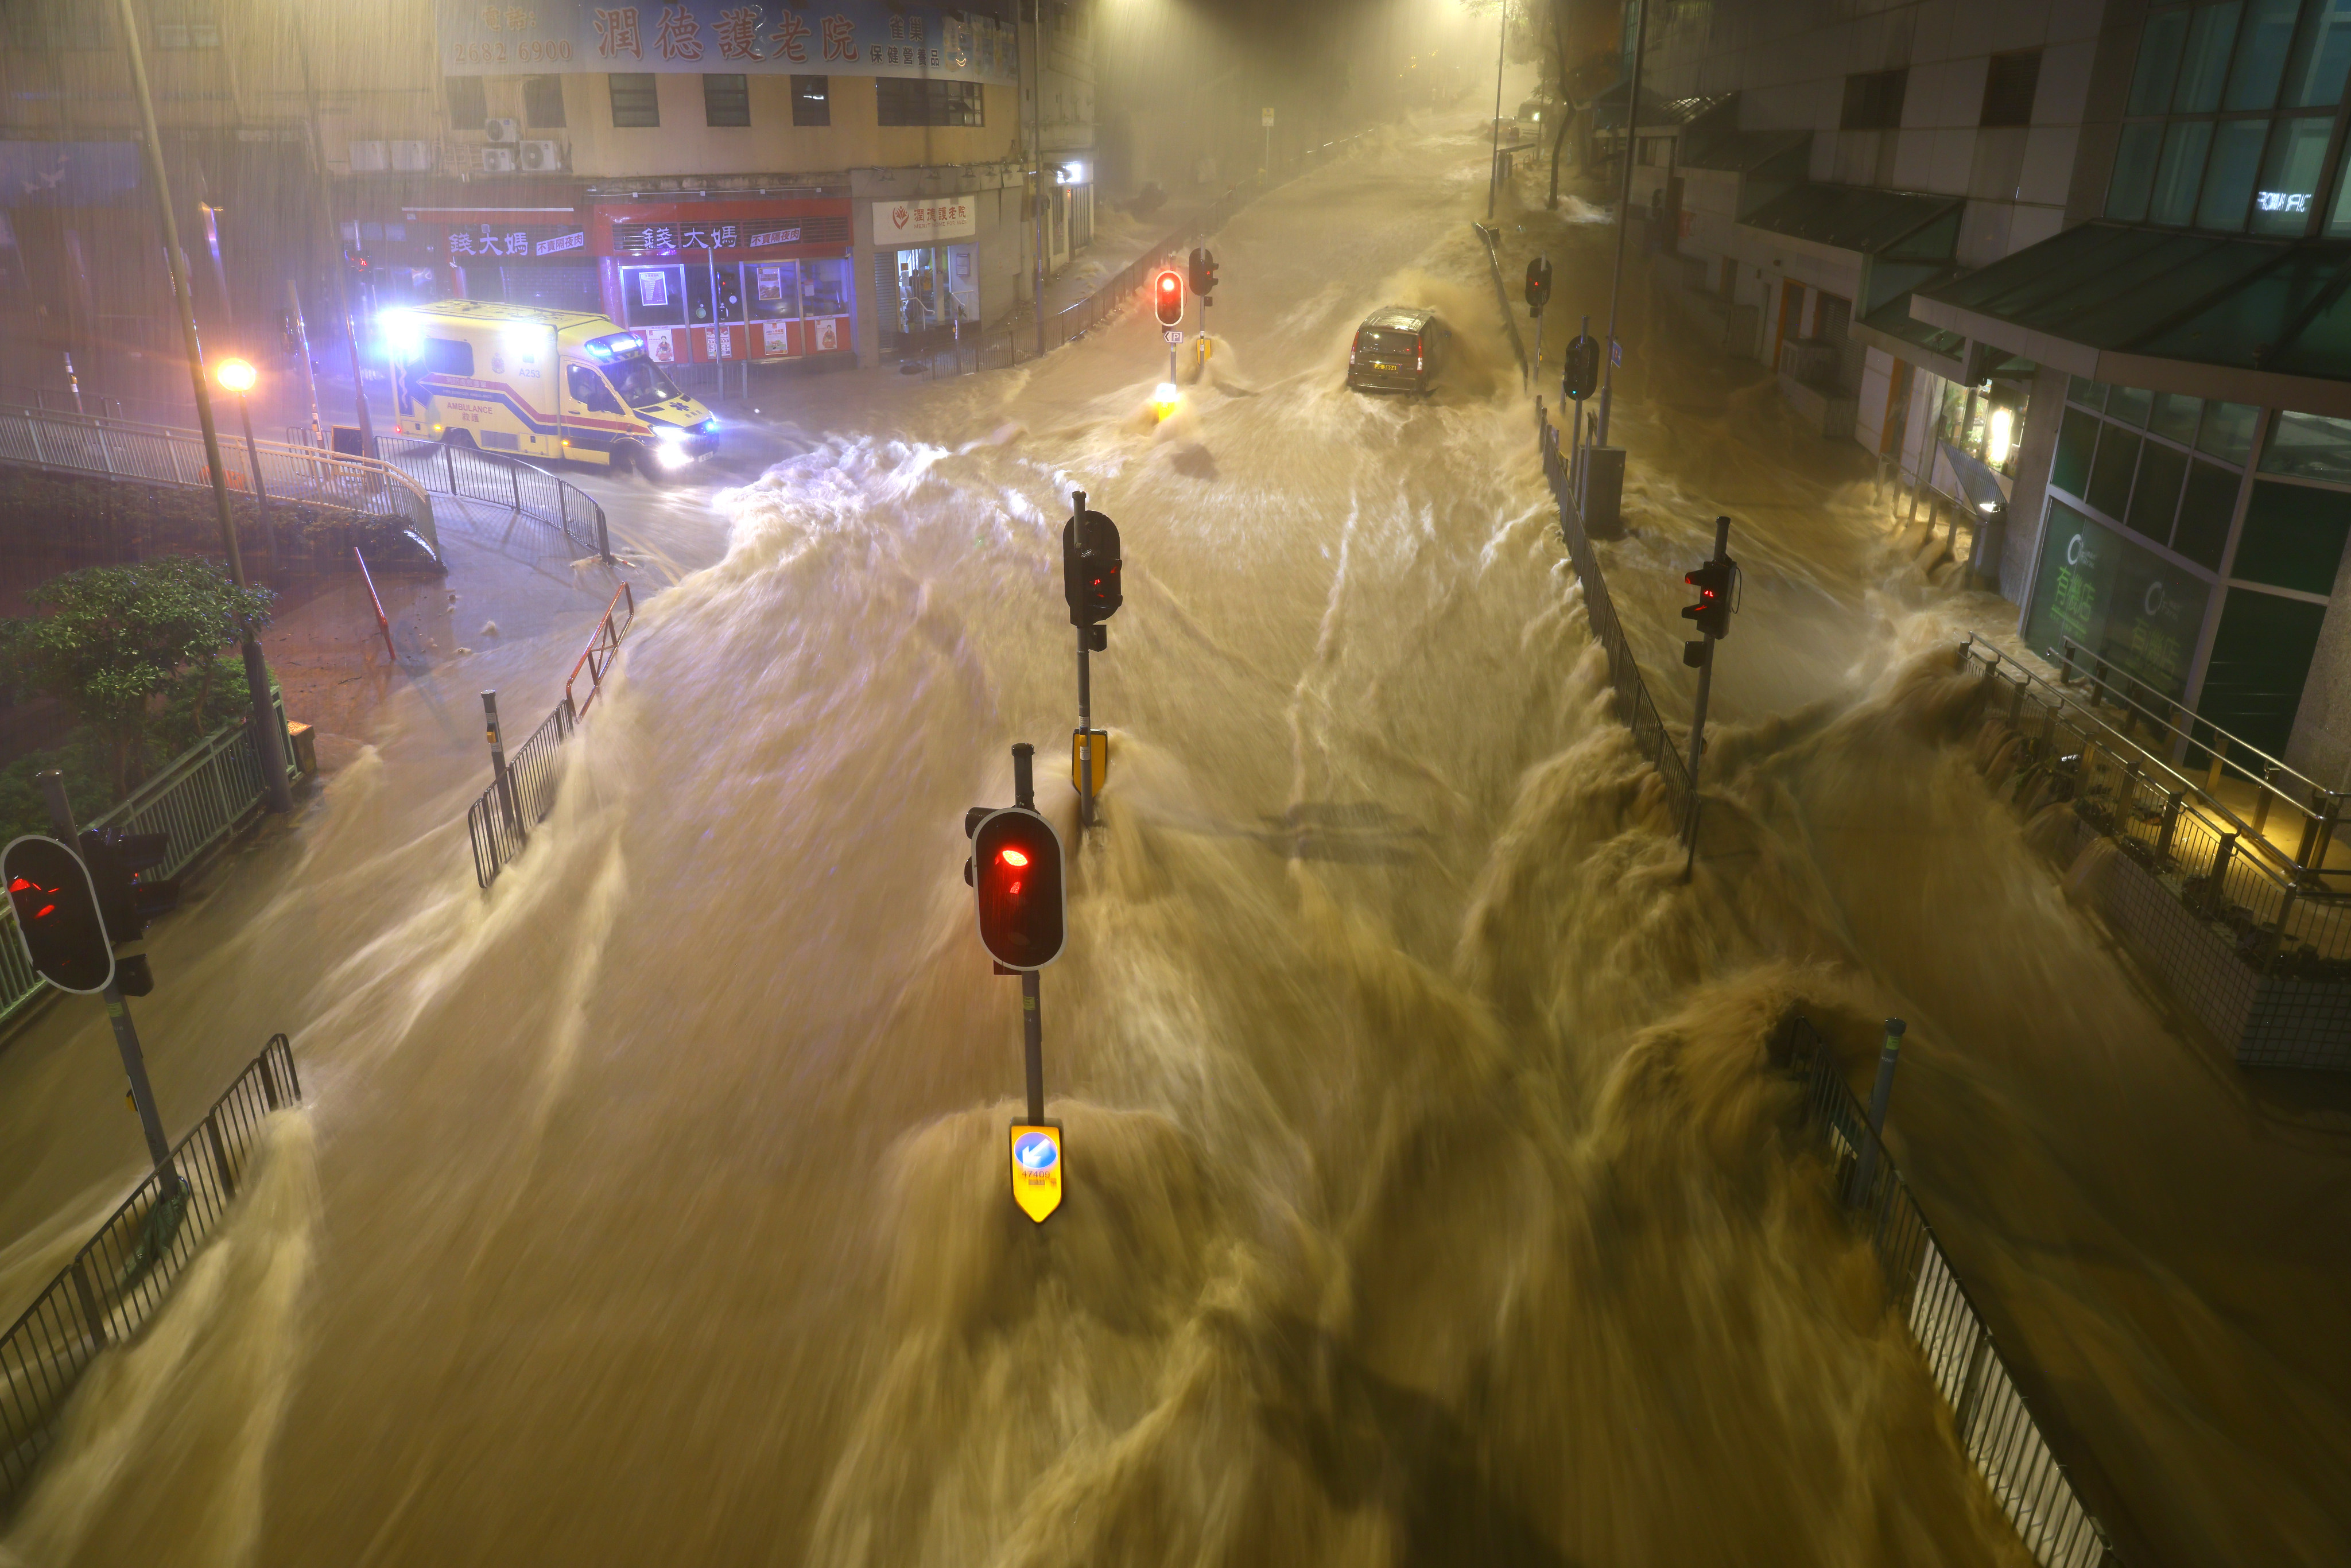 Hong Kong’s Chai Wan district experienced serious flooding on September 8 when the city was hit by a black rainstorm. Questions were raised why the emergency alert system was not used to warn residents of the storm. Photo: Dickson Lee